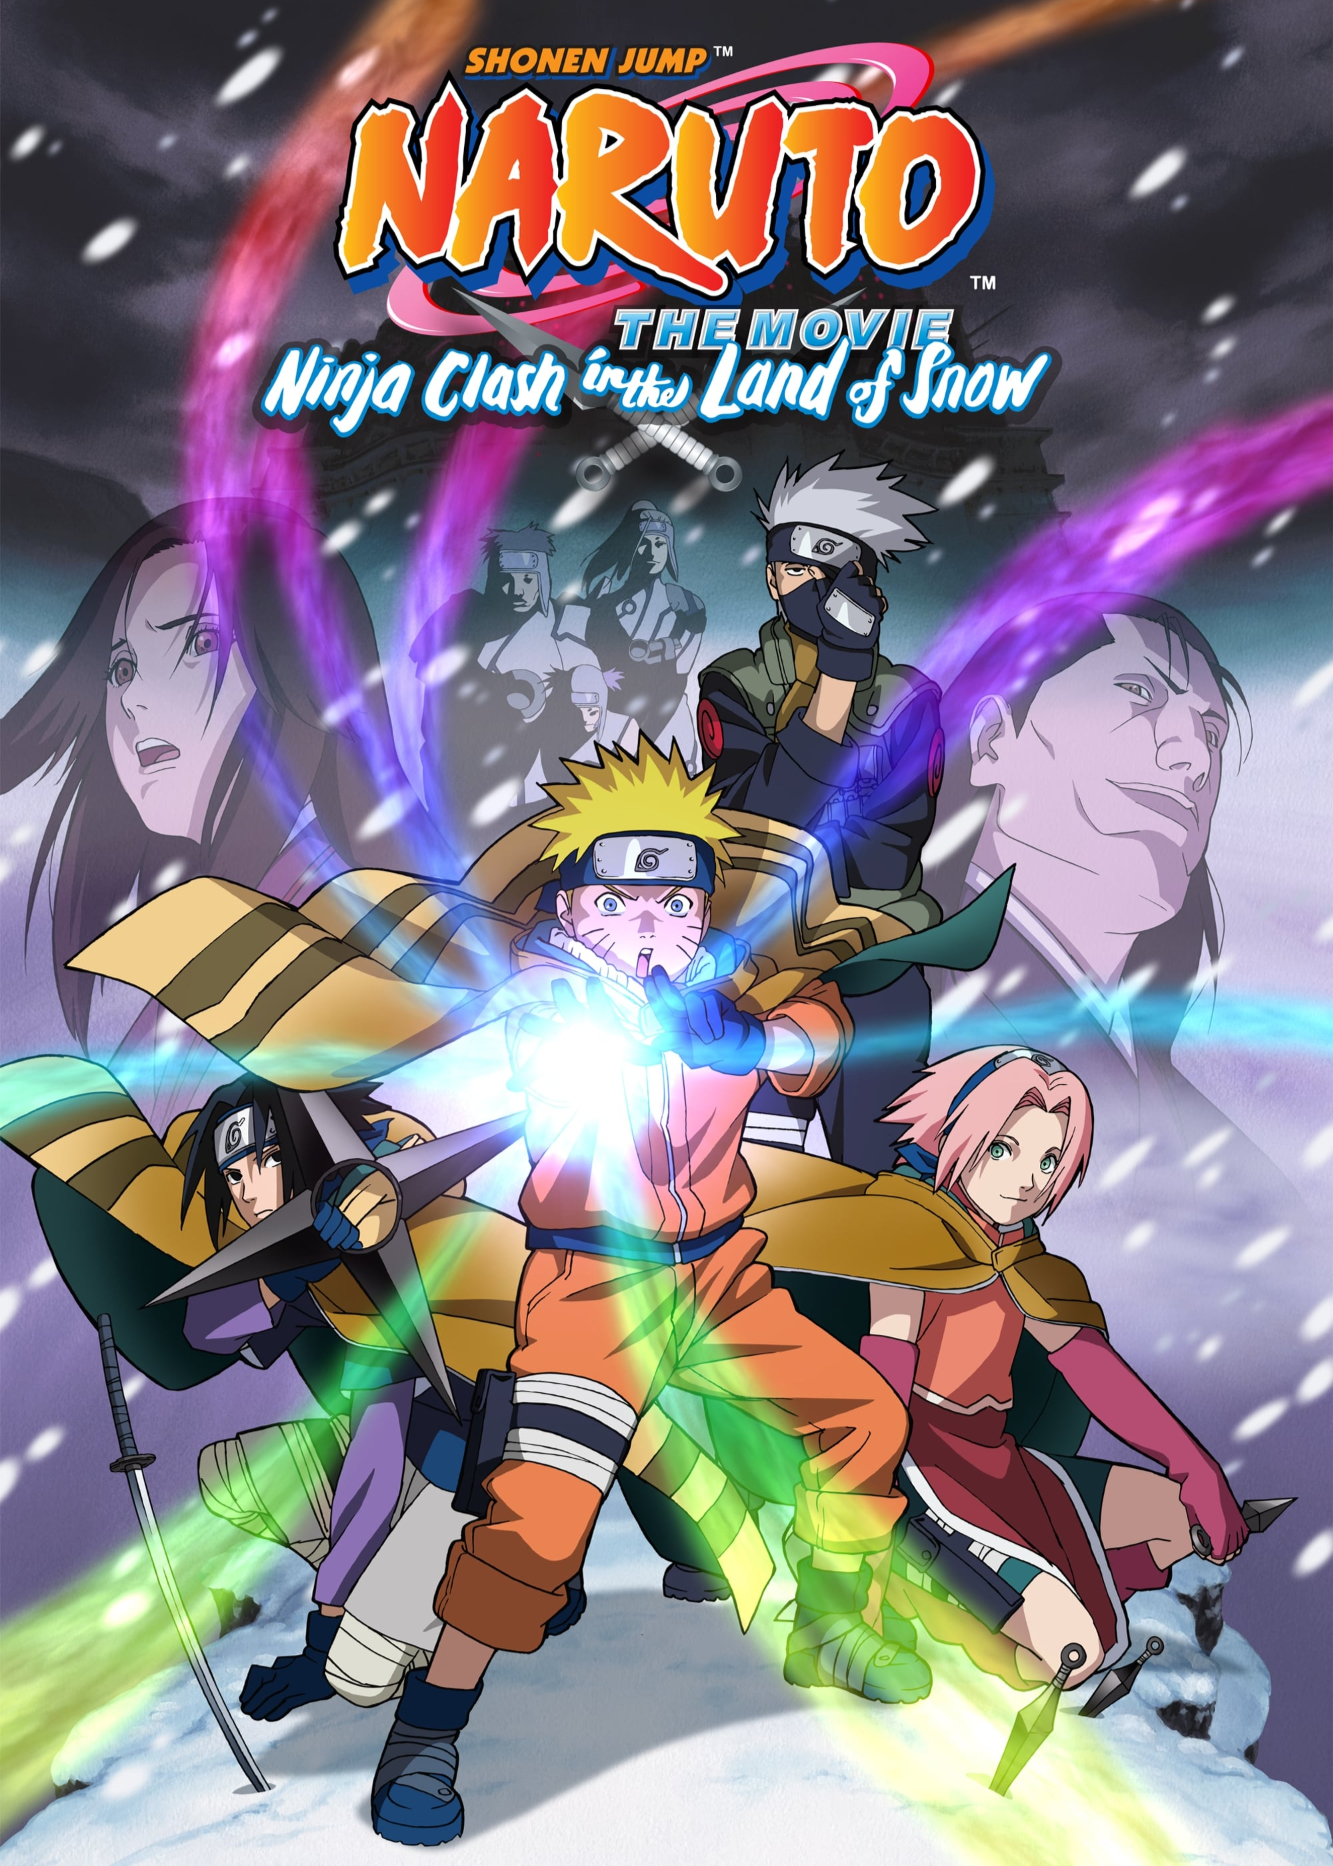 Poster Phim Naruto: Cuộc Chiến Ở Tuyết Quốc (Naruto the Movie: Ninja Clash in the Land of Snow)